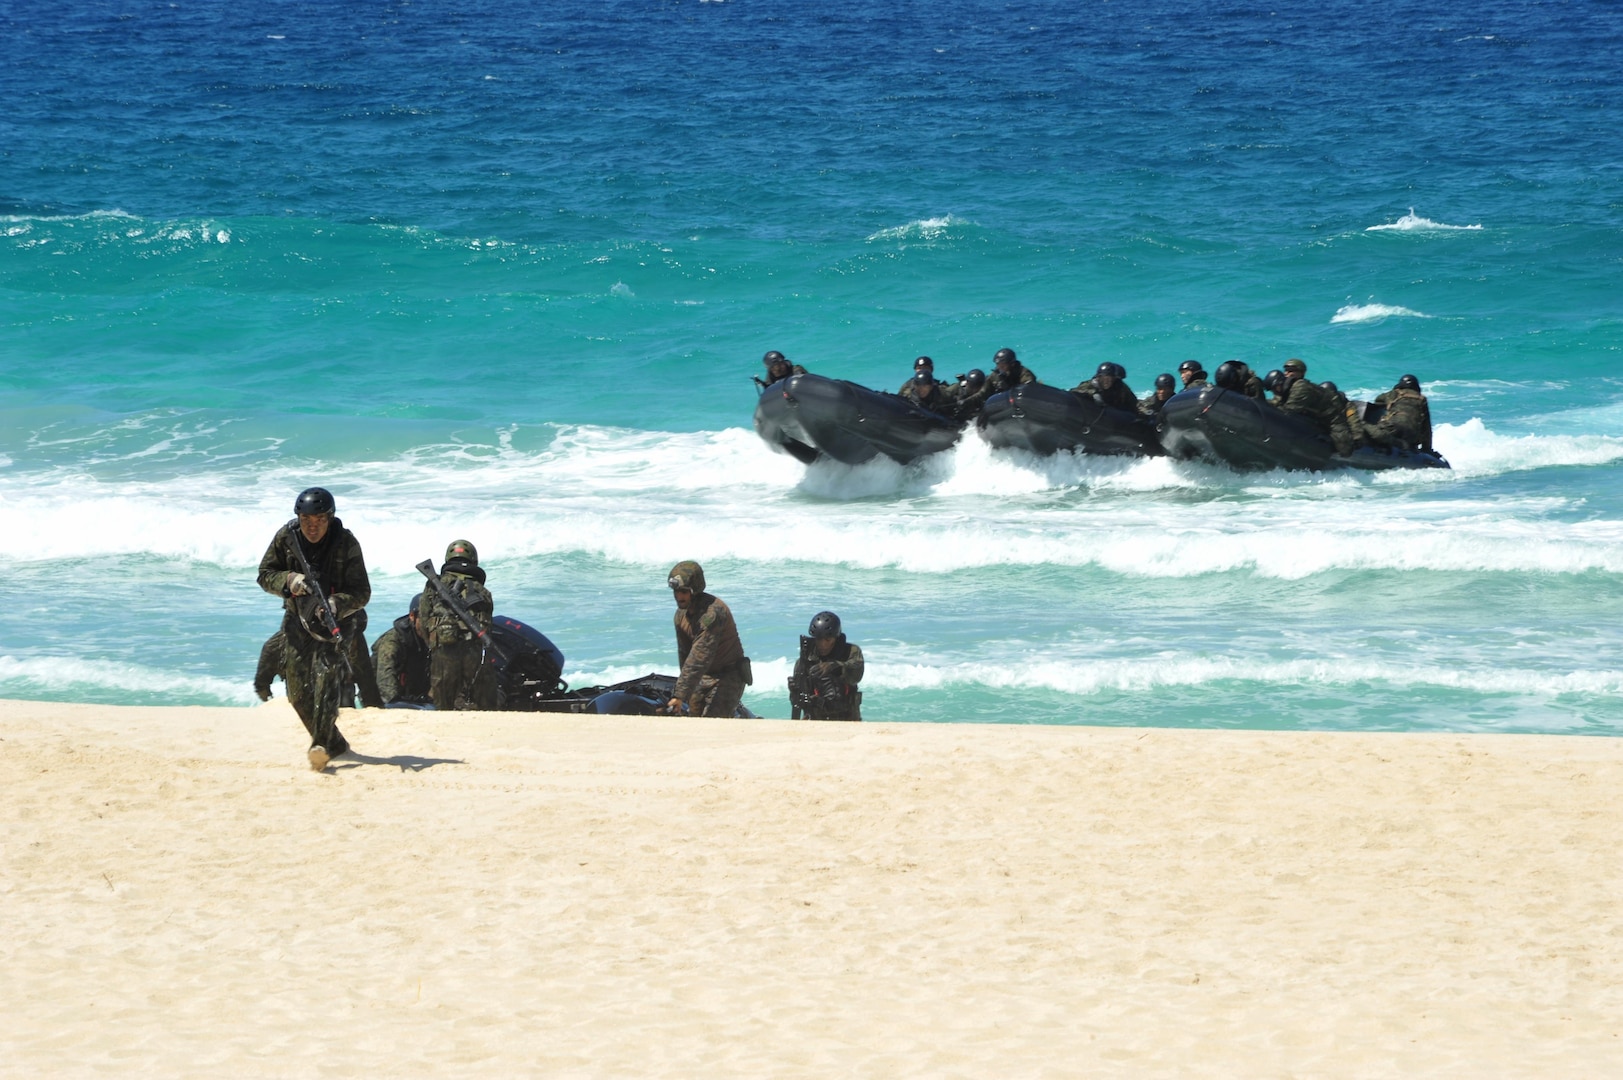 140728-N-UL721-095 MARINE CORPS BASE HAWAII (July 28, 2014) Members of Japan Ground Self-Defense Force arrive ashore performing reconnaissance during Rim of the Pacific (RIMPAC) Exercise 2014. Twenty-two nations, 49 ships, six submarines, more than 200 aircraft and 25,000 personnel are participating in RIMPAC from June 26 to Aug. 1, in and around the Hawaiian Islands and Southern California. The world's largest maritime exercise, RIMPAC provides a unique training opportunity that helps participants foster and sustain the cooperative relationships that are critical to ensuring the safety of sea lanes and security on the world's oceans. RIMPAC 2014 is the 24th exercise in the series that began in 1971. (U.S. Navy photo by Mass Communication Specialist 2nd Class Corey T. Jones/Released)